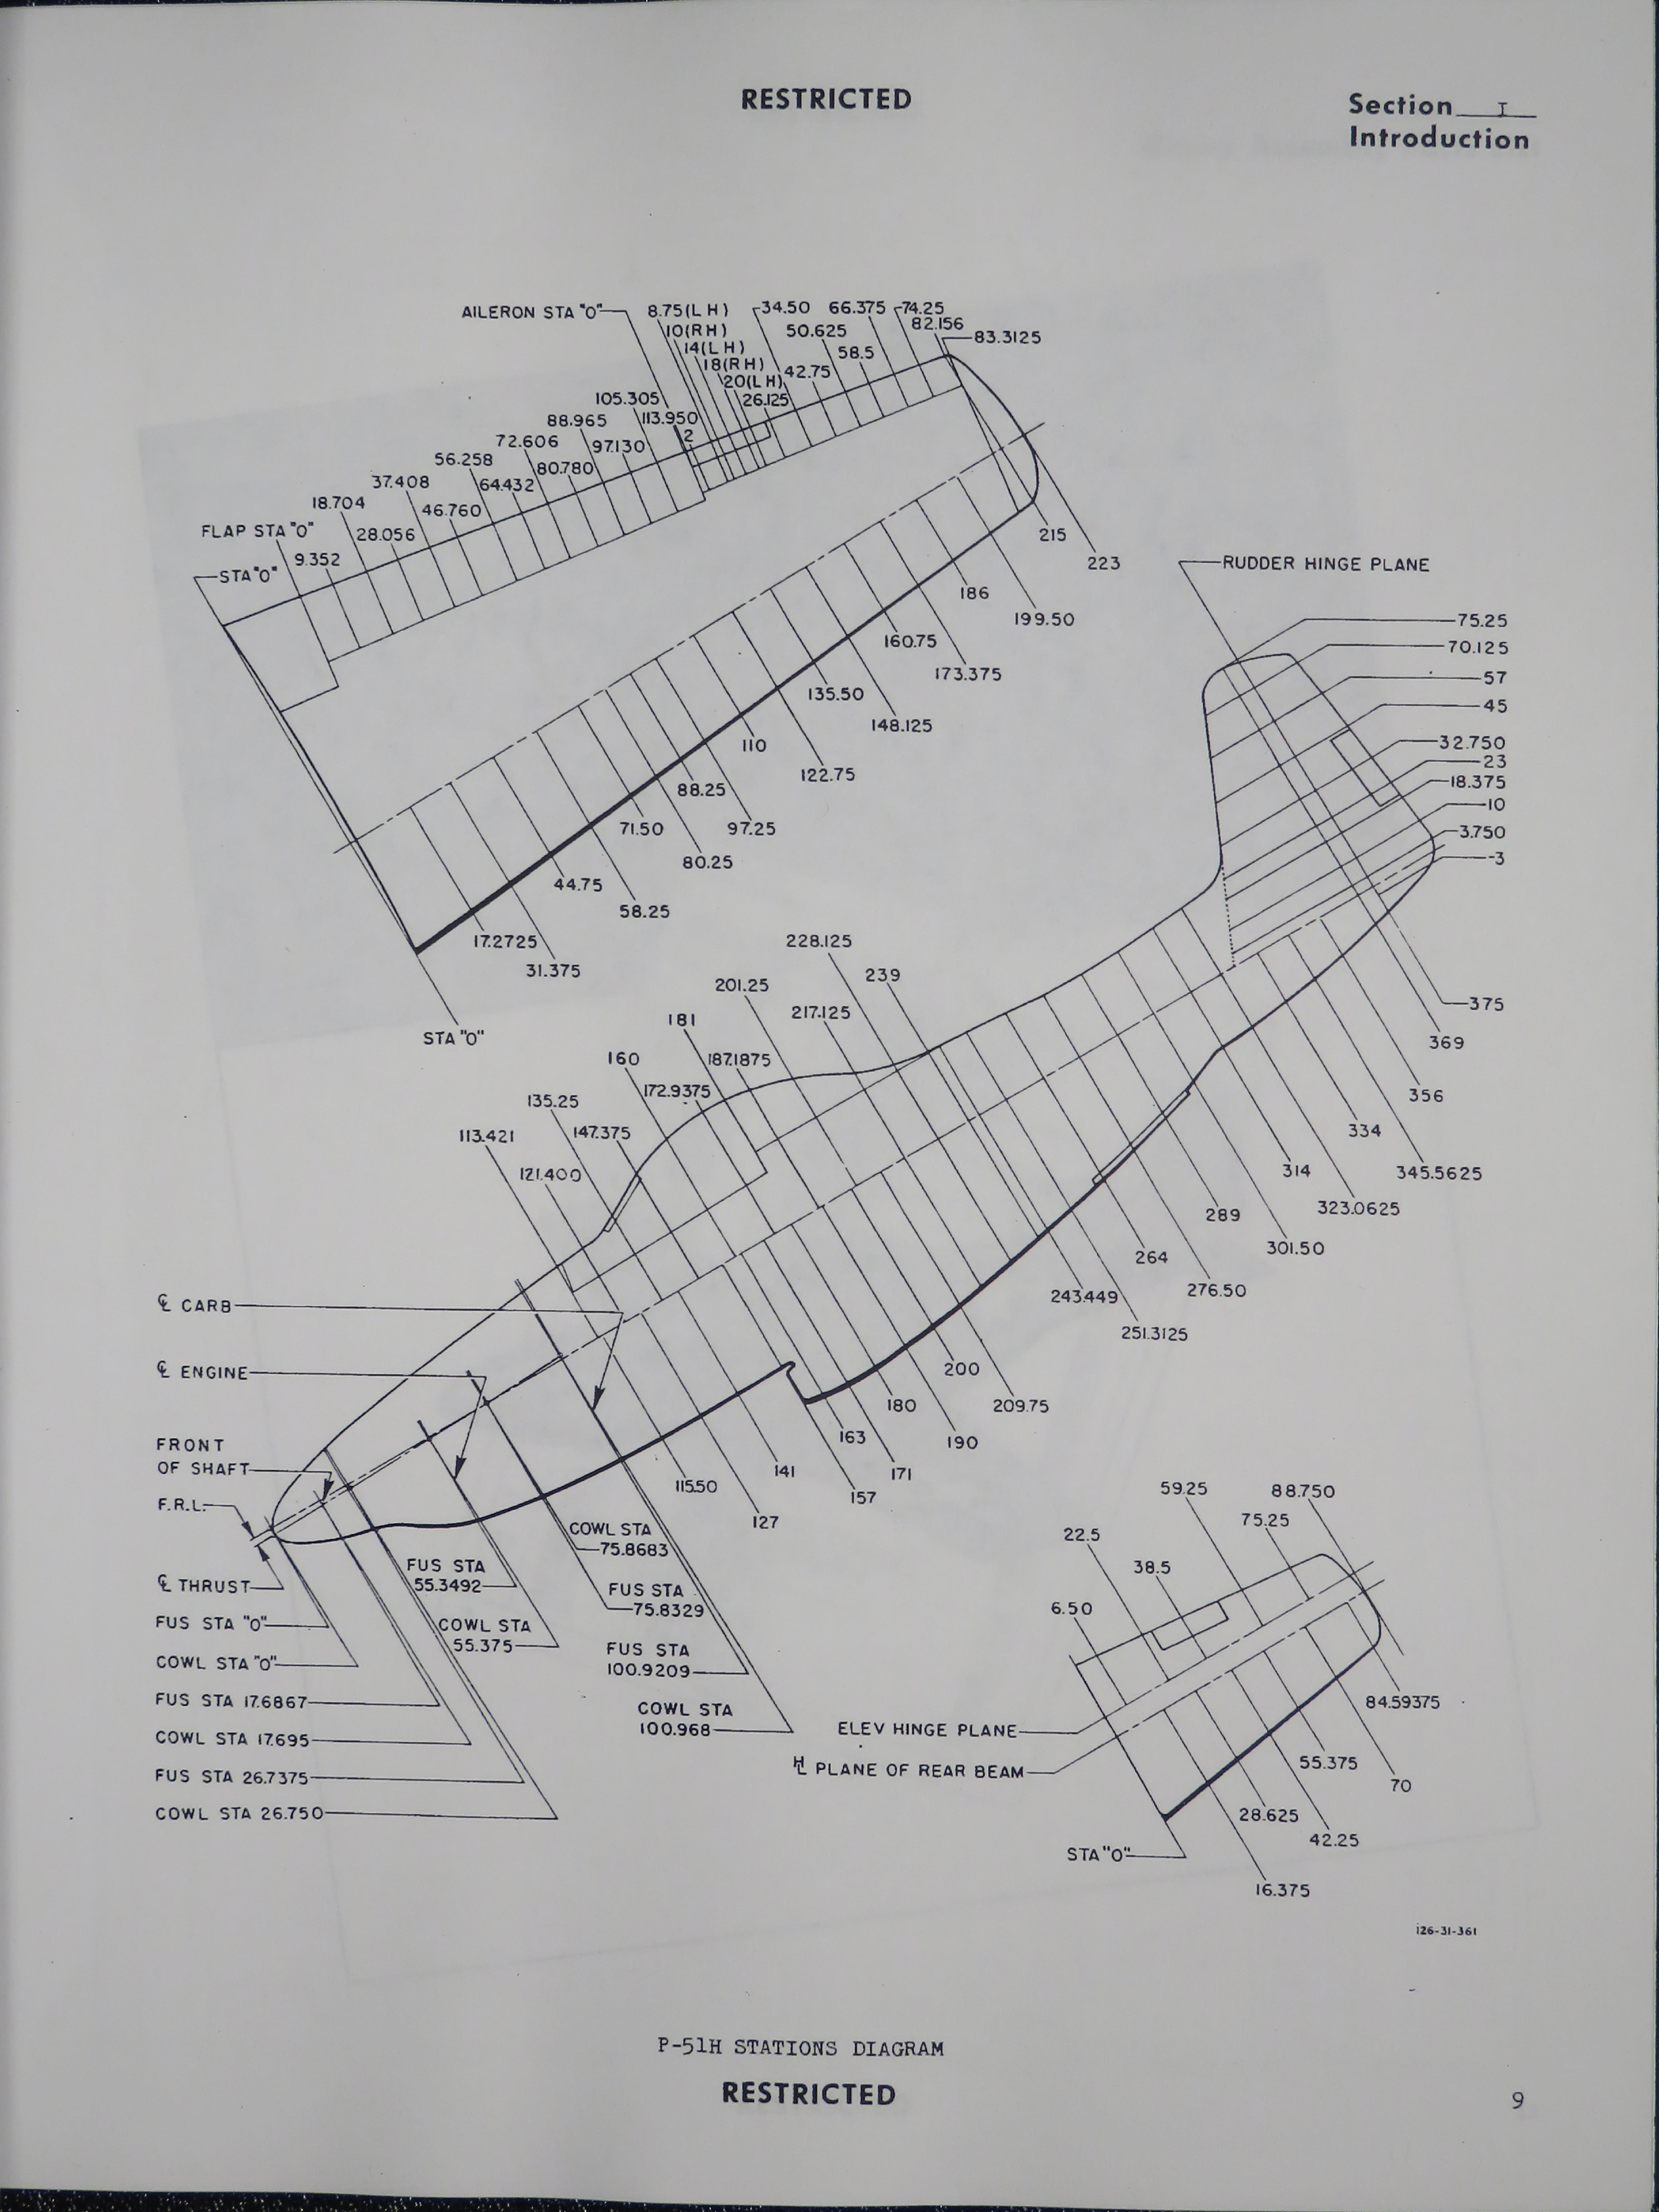 Sample page 17 from AirCorps Library document: Preliminary Parts Catalog for P-51H